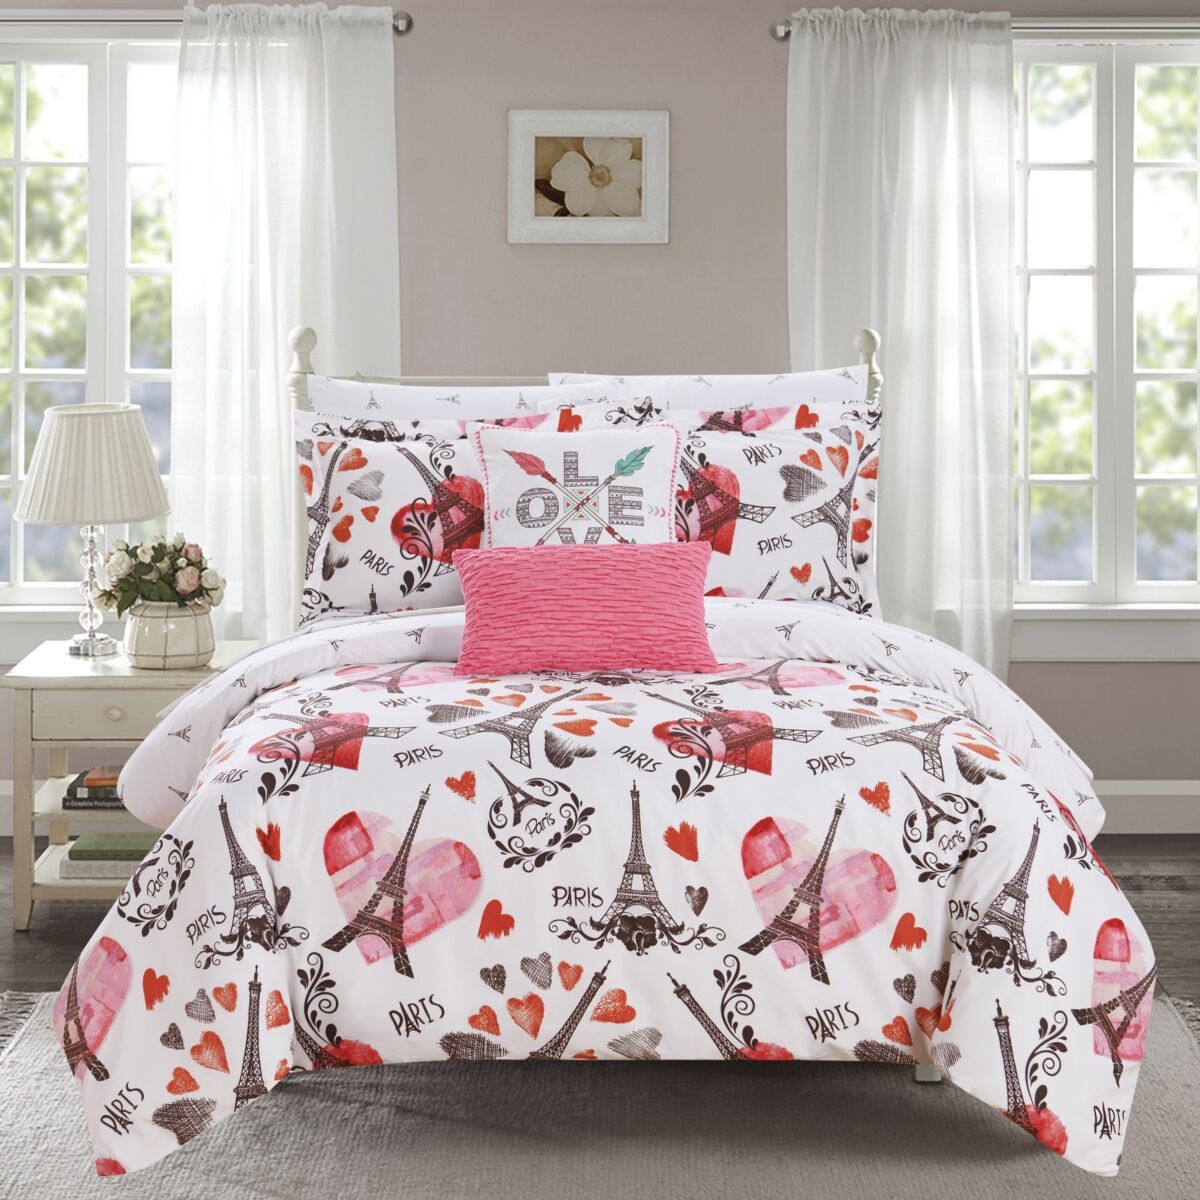 Chic Home Le Marias 9 Piece Full Bed In a Bag Comforter Set - Pink